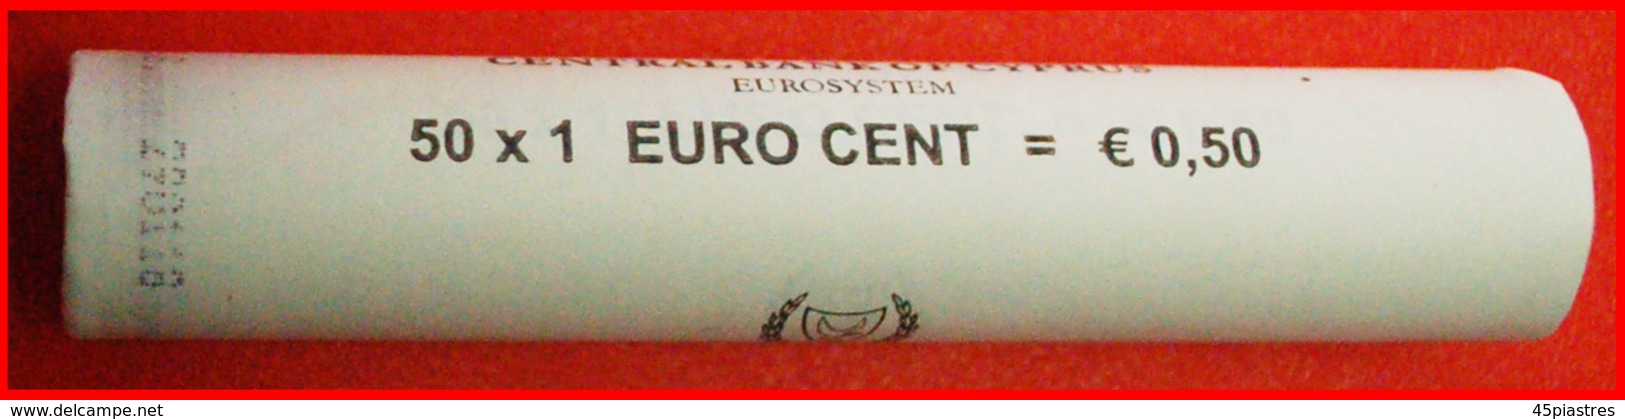 # GREECE: CYPRUS ★ 1 CENT 2018 UNC ROLL! LOW START ★ NO RESERVE! - Rollos